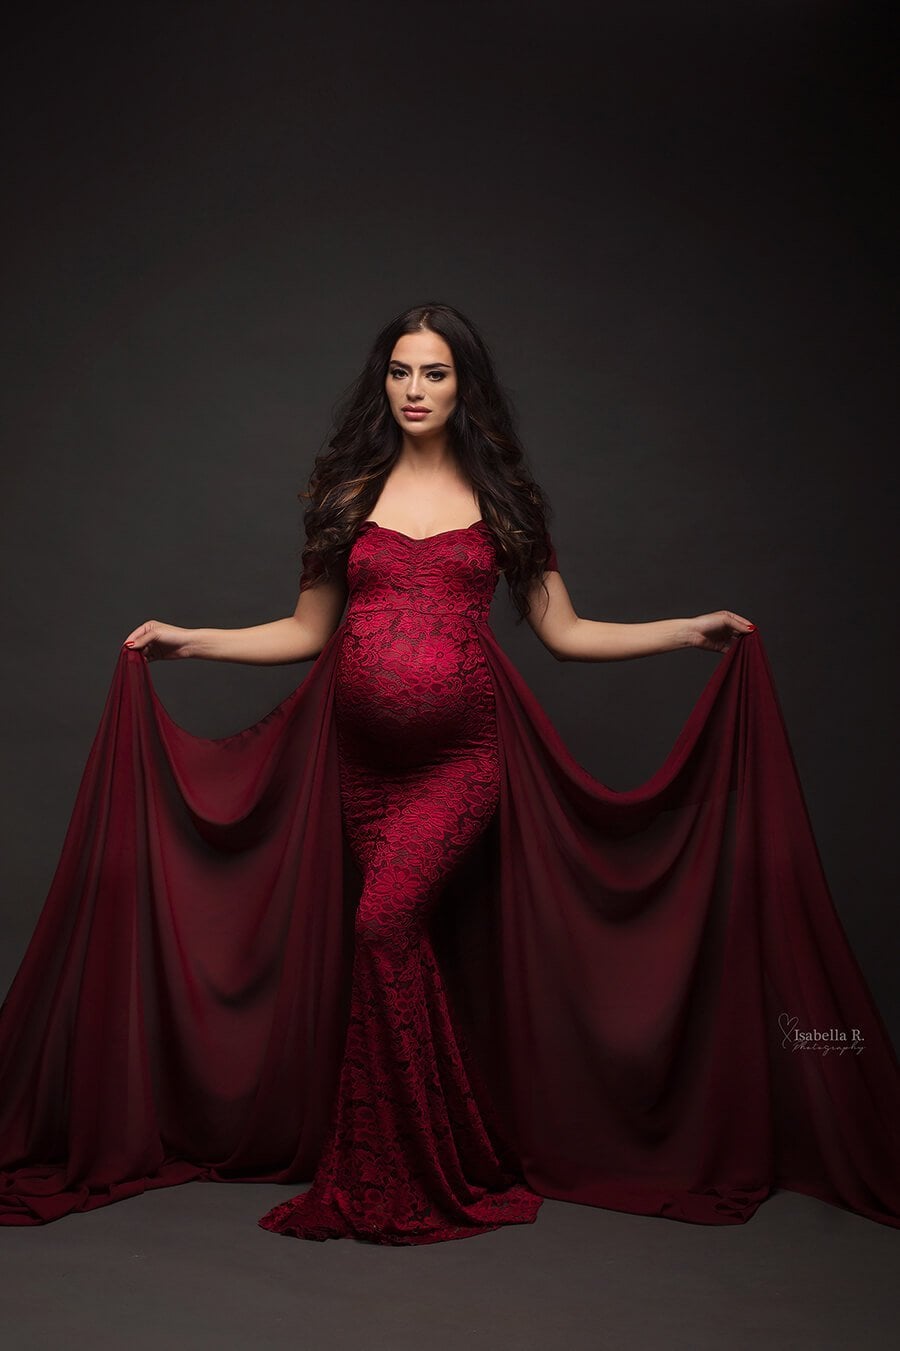 Red Lace Papoula Gown - maternity photoshoot dress